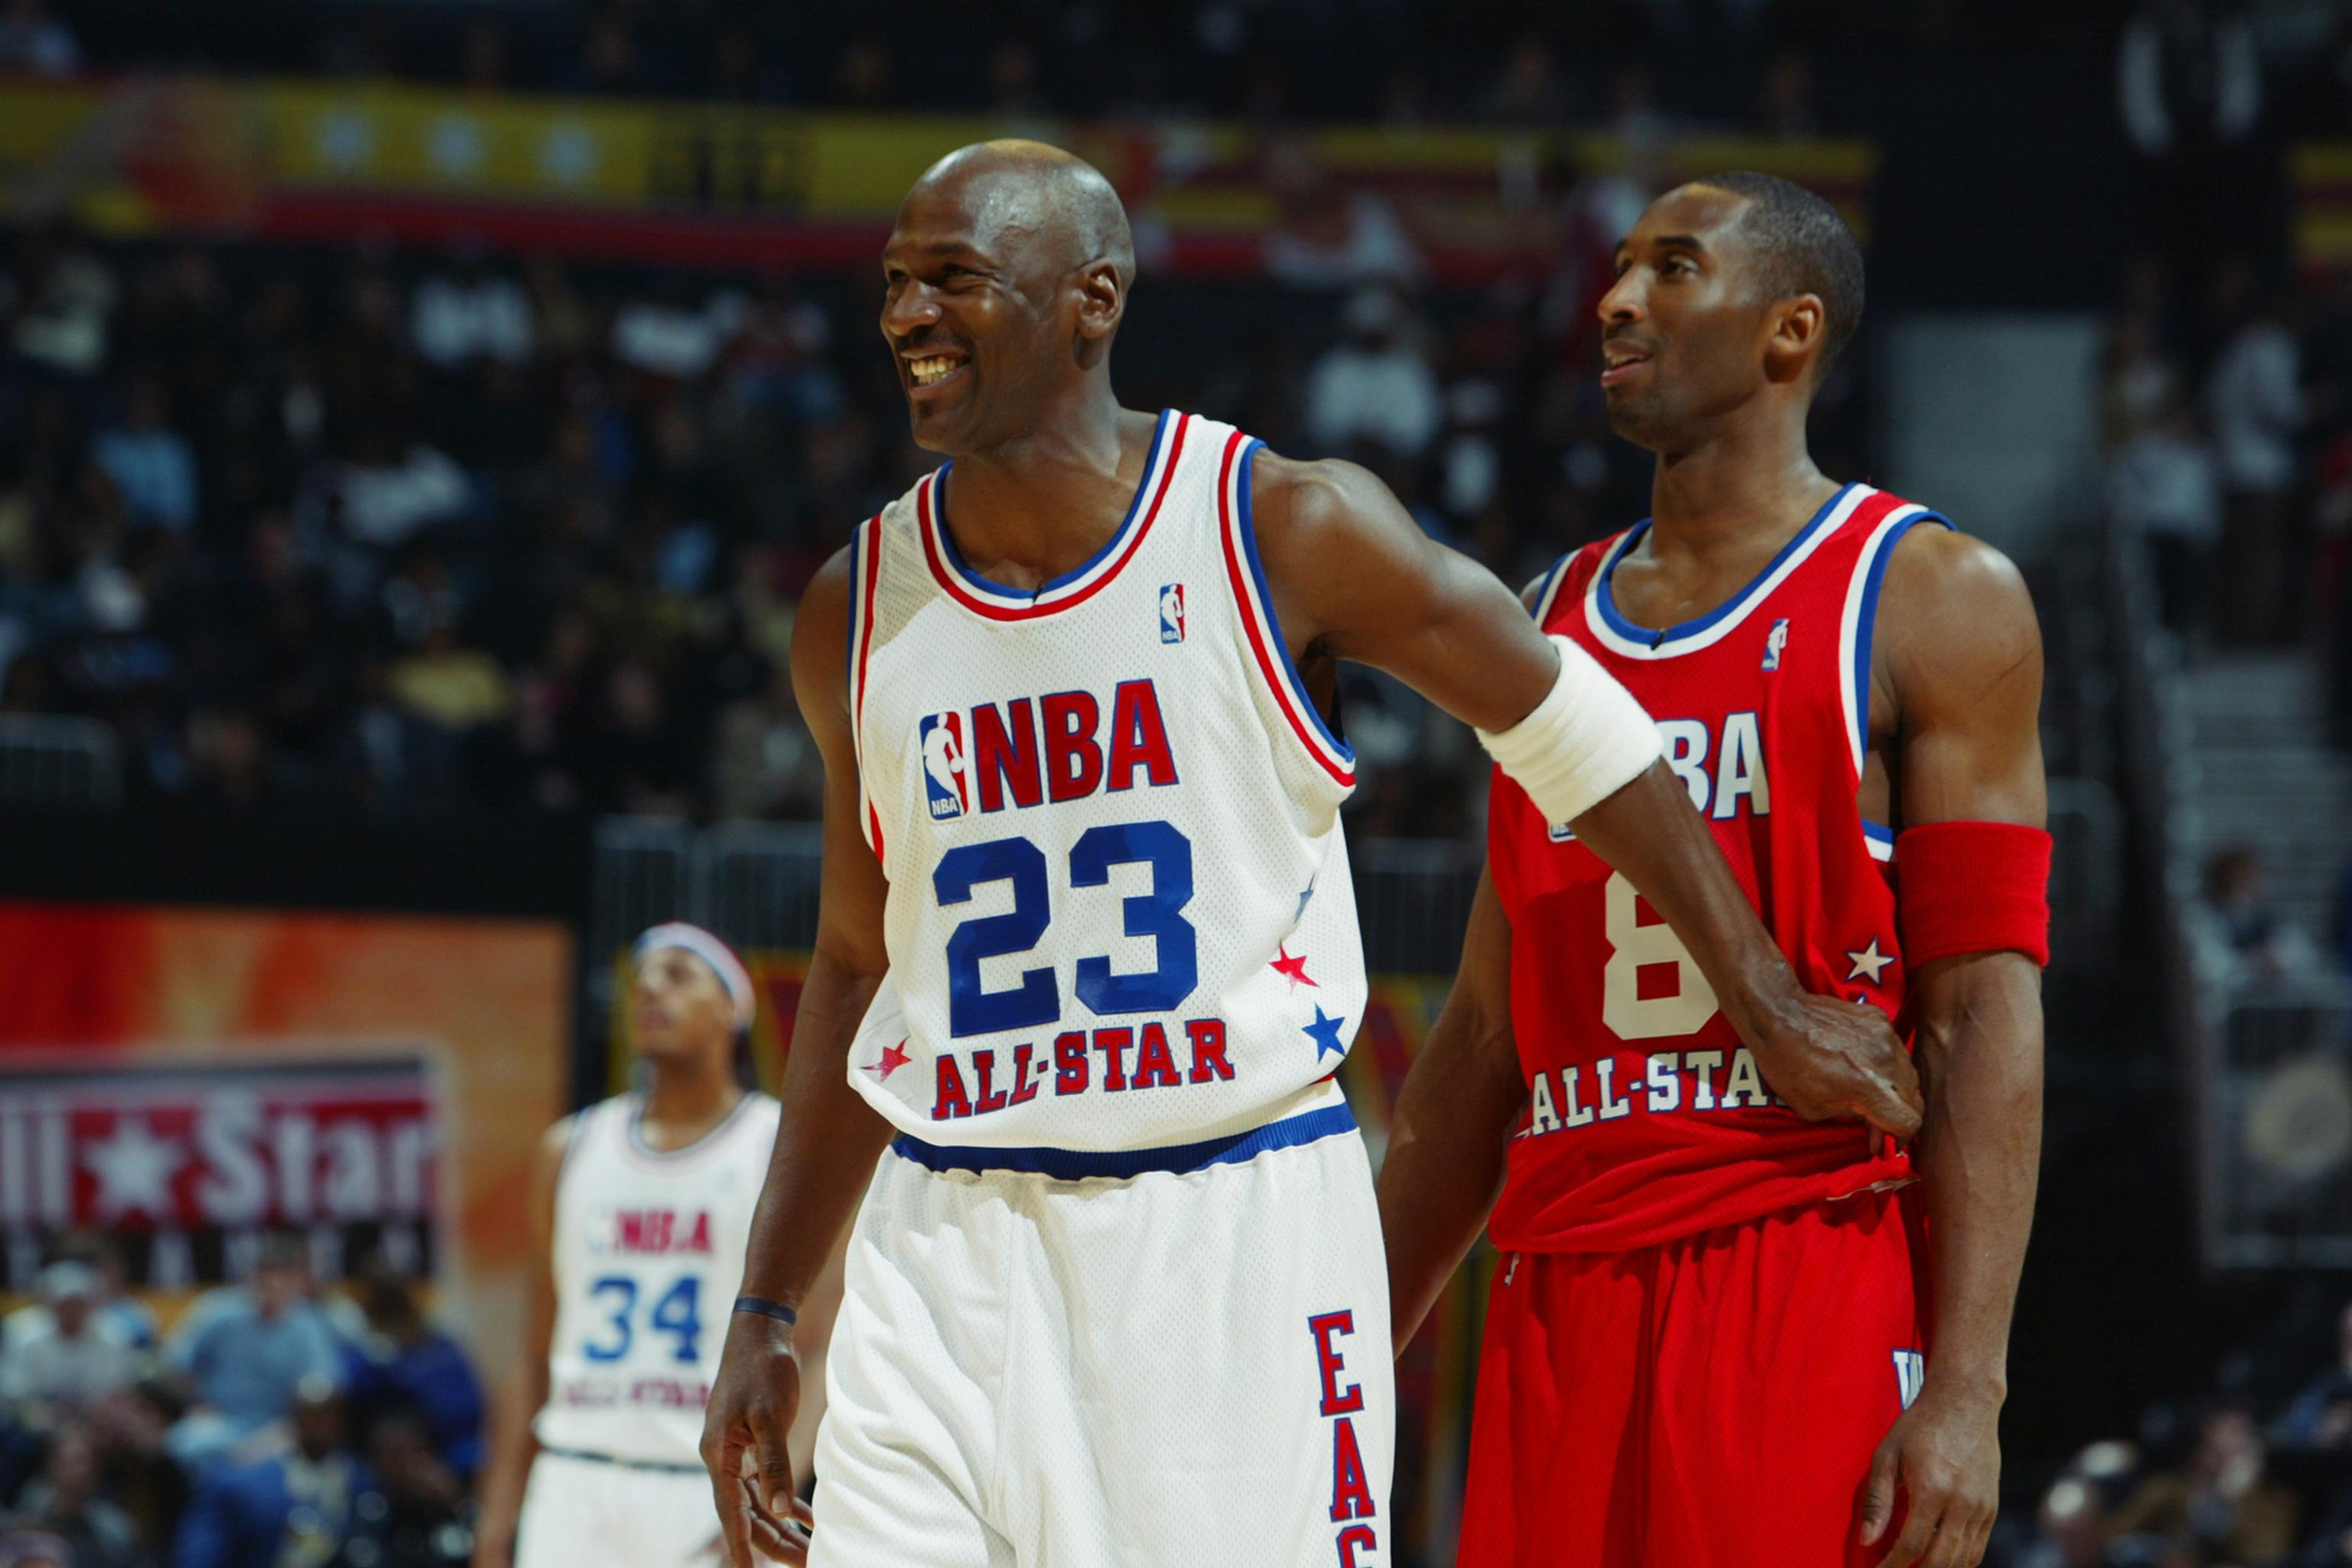 156 1996 Nba All Star Game Photos & High Res Pictures - Getty Images